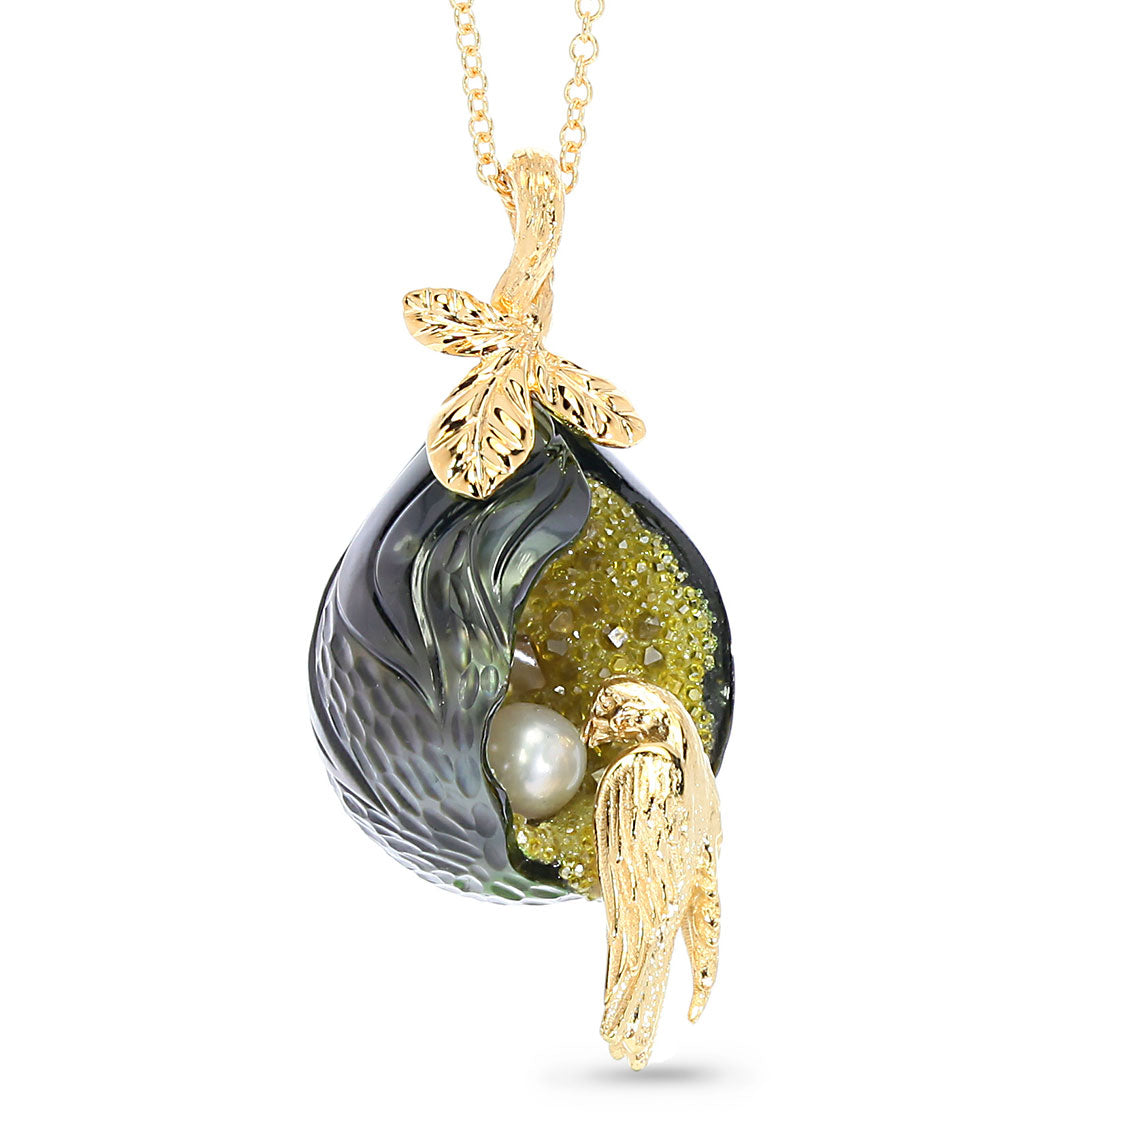 Galatea "A Mother's Love" Tahitian Pearl Necklace